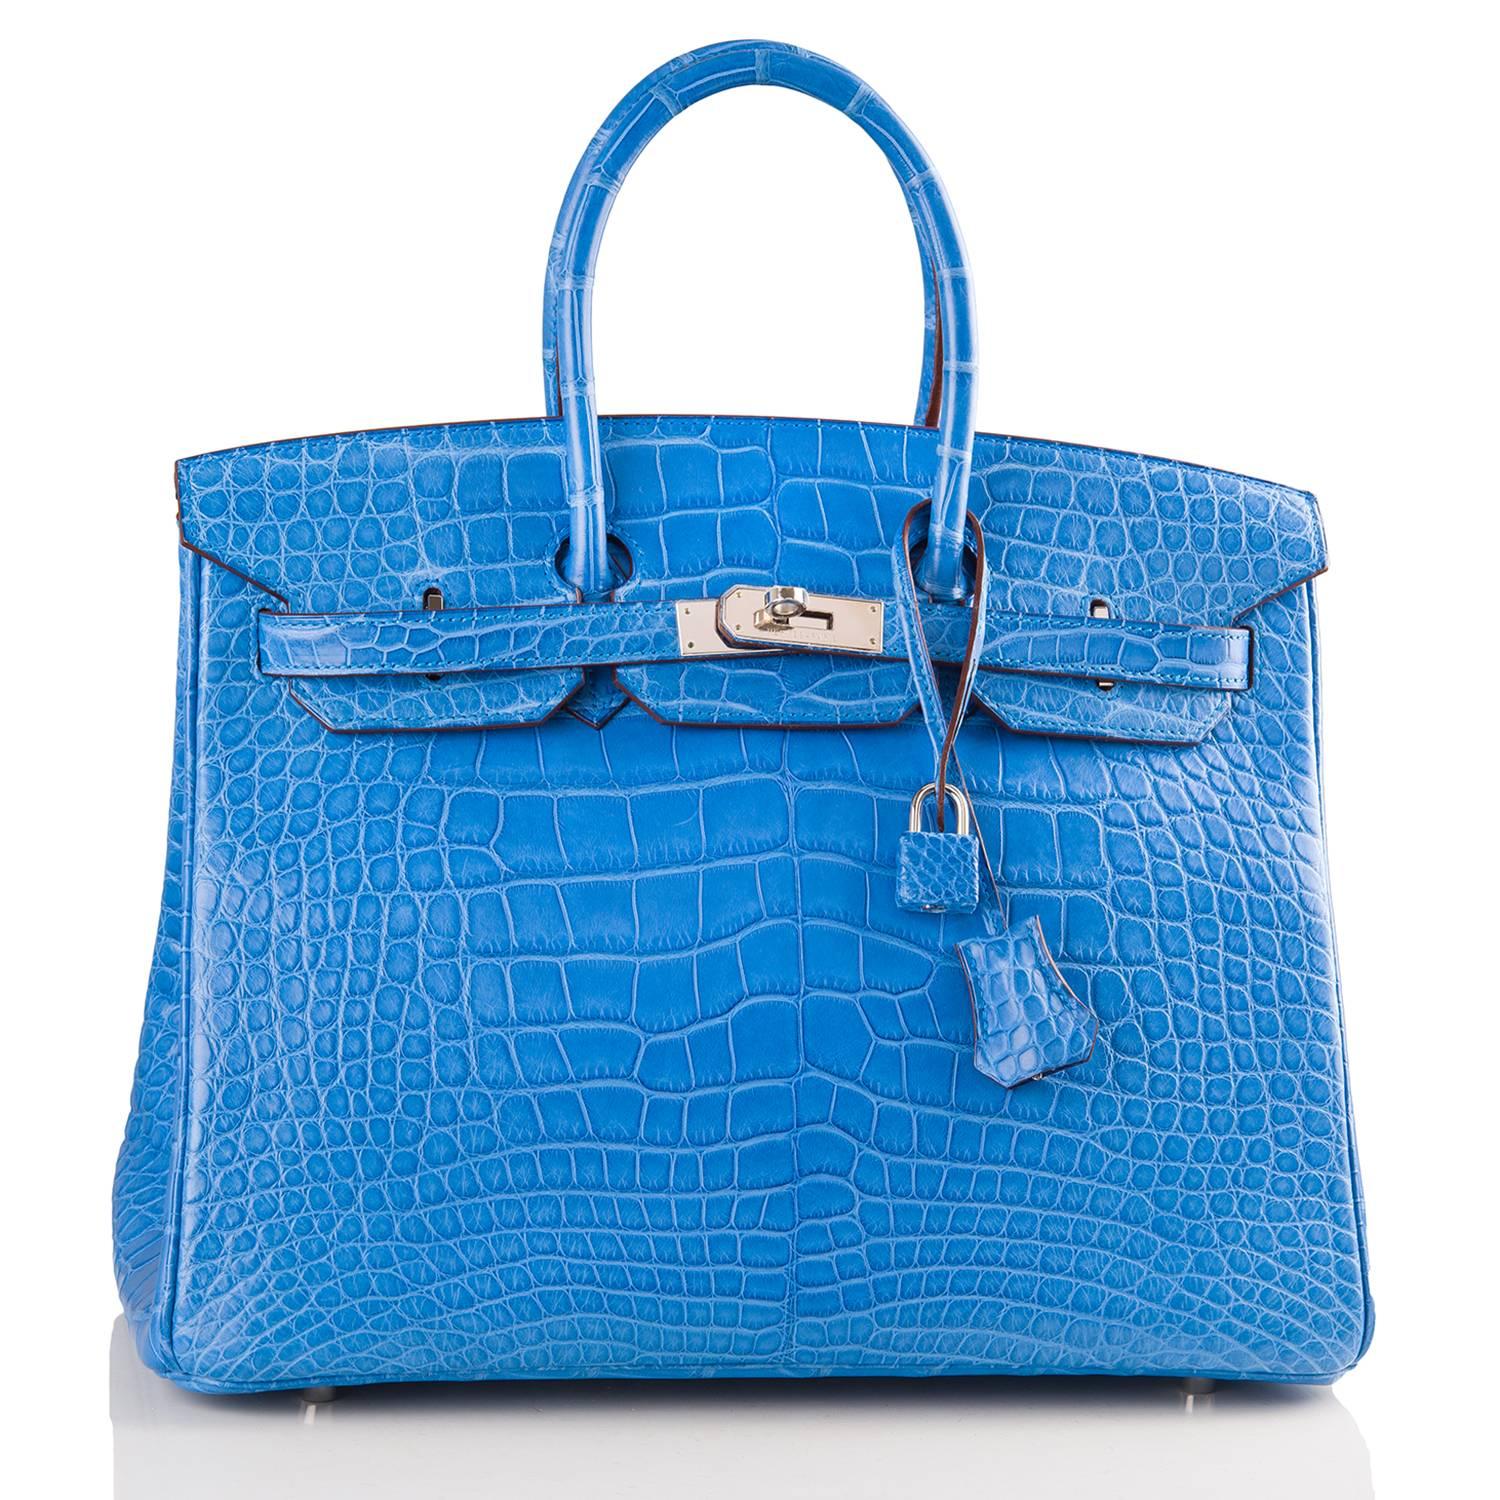 Hermes Mykonos Birkin 35cm of matte alligator leather with palladium hardware.

This Birkin has tonal stitching, a front toggle closure, a clochette with lock and two keys, and double rolled handles.

The interior is lined with Mykonos chevre